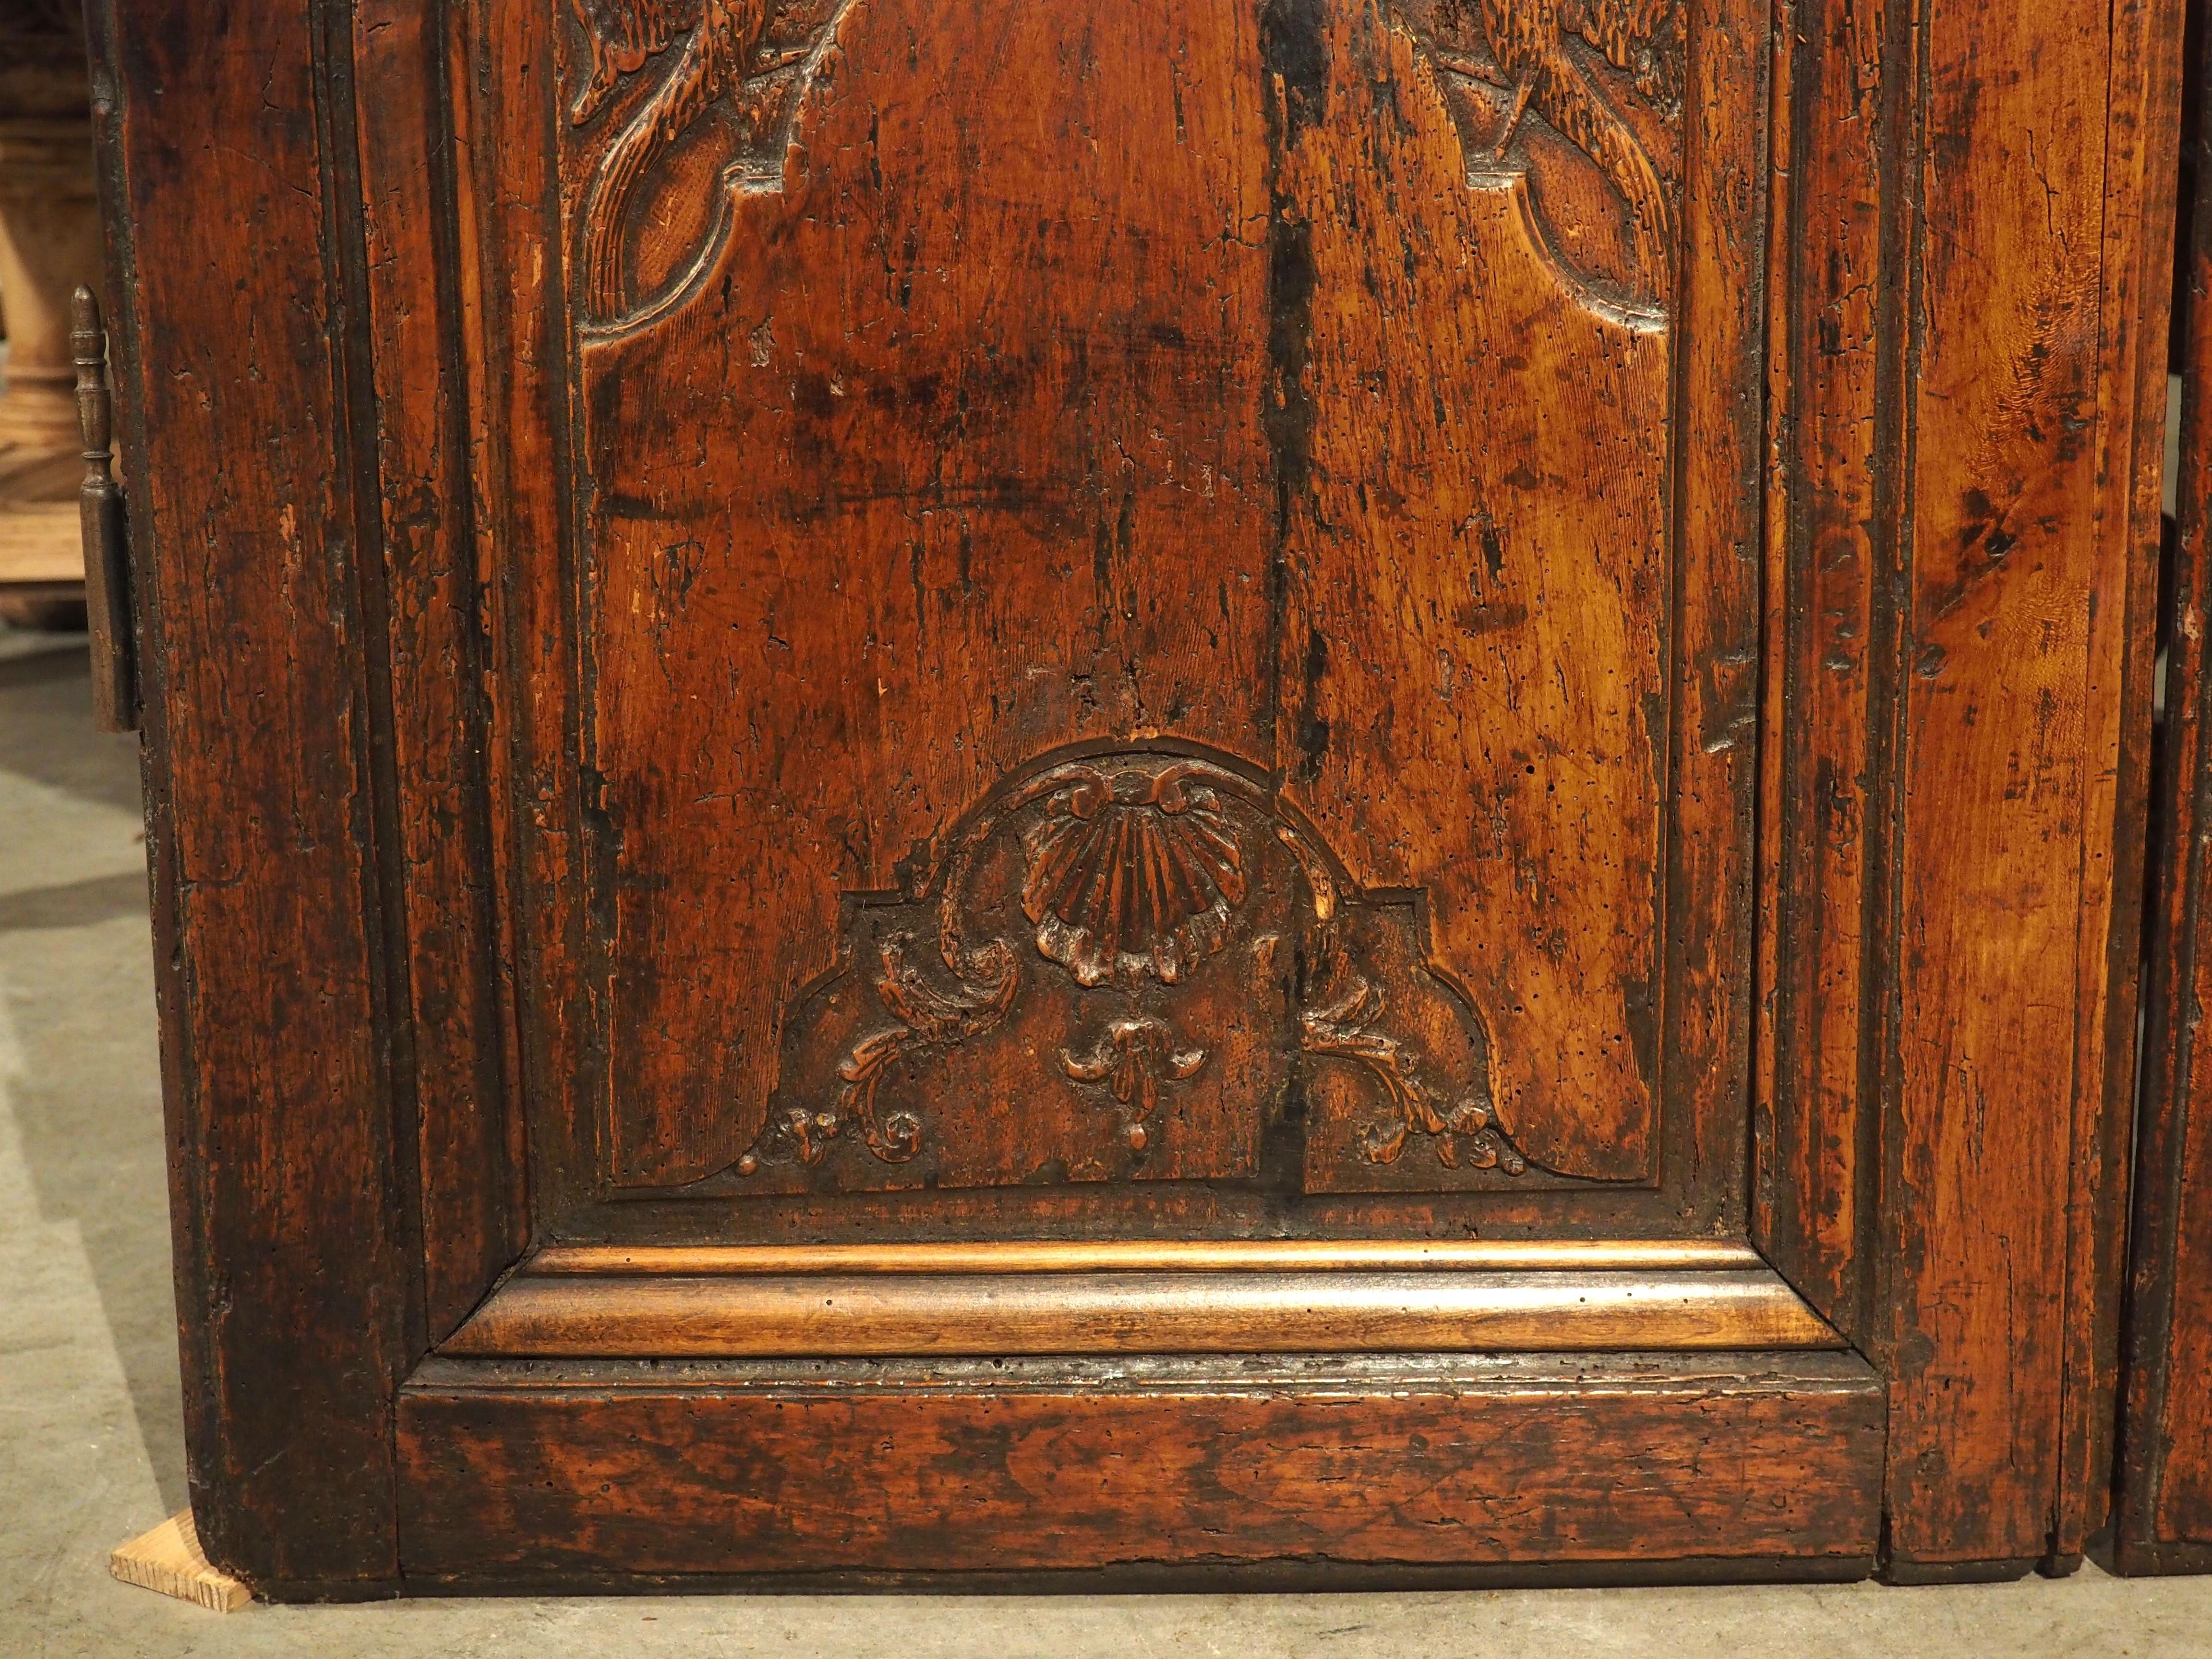 French Pair of Antique Cherry Wood Armoire Doors from Rennes, France, Circa 1720